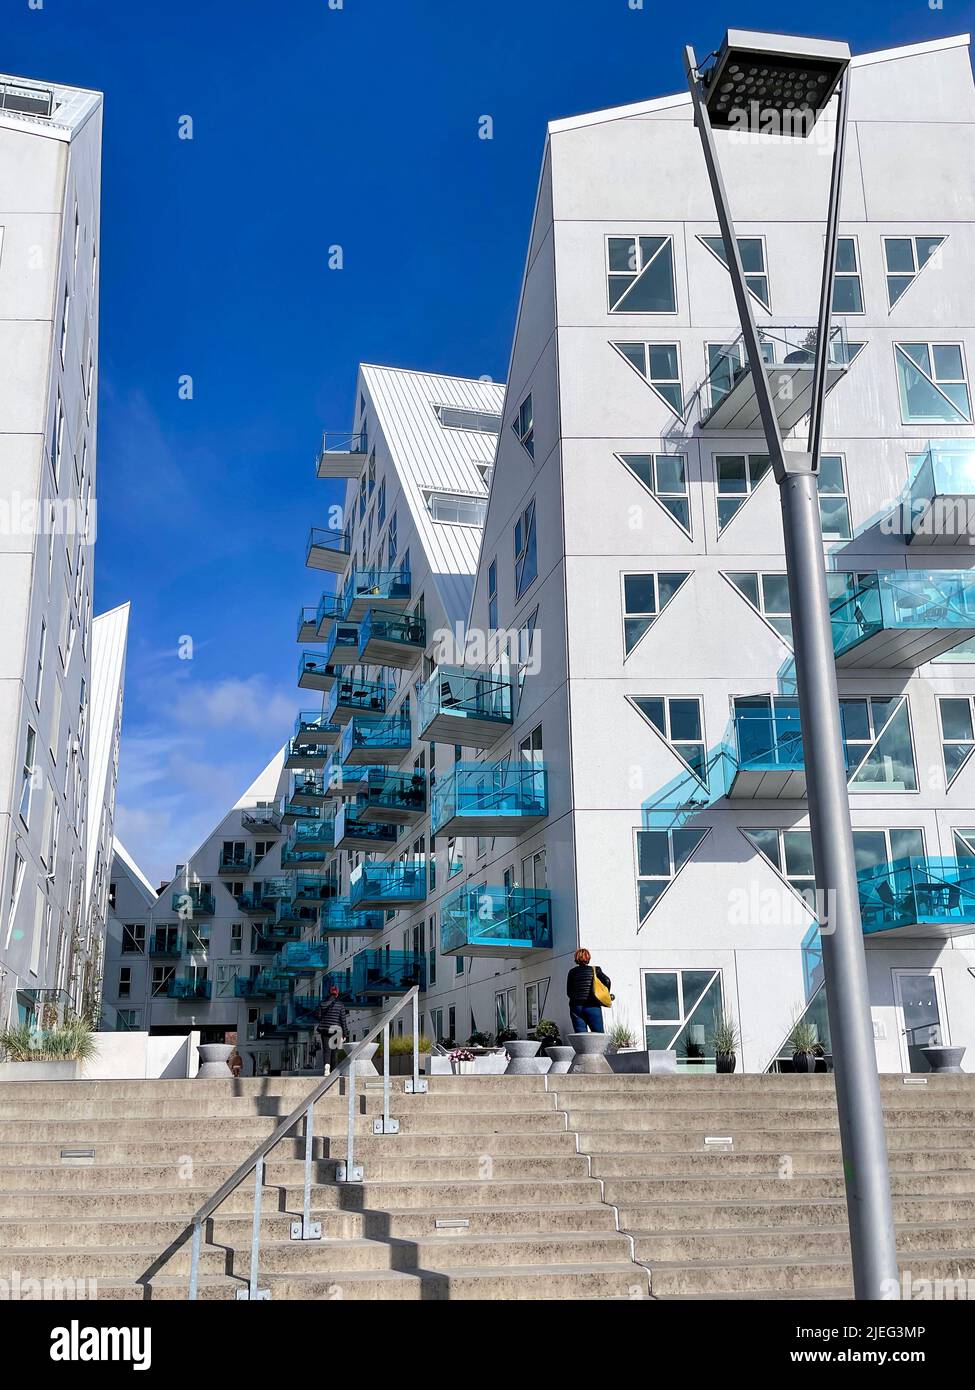 Isbjerget (The Iceberg) is a residential building in the Aarhus Docklands neighborhood. It consists of four buildings and was designed after icebergs Stock Photo